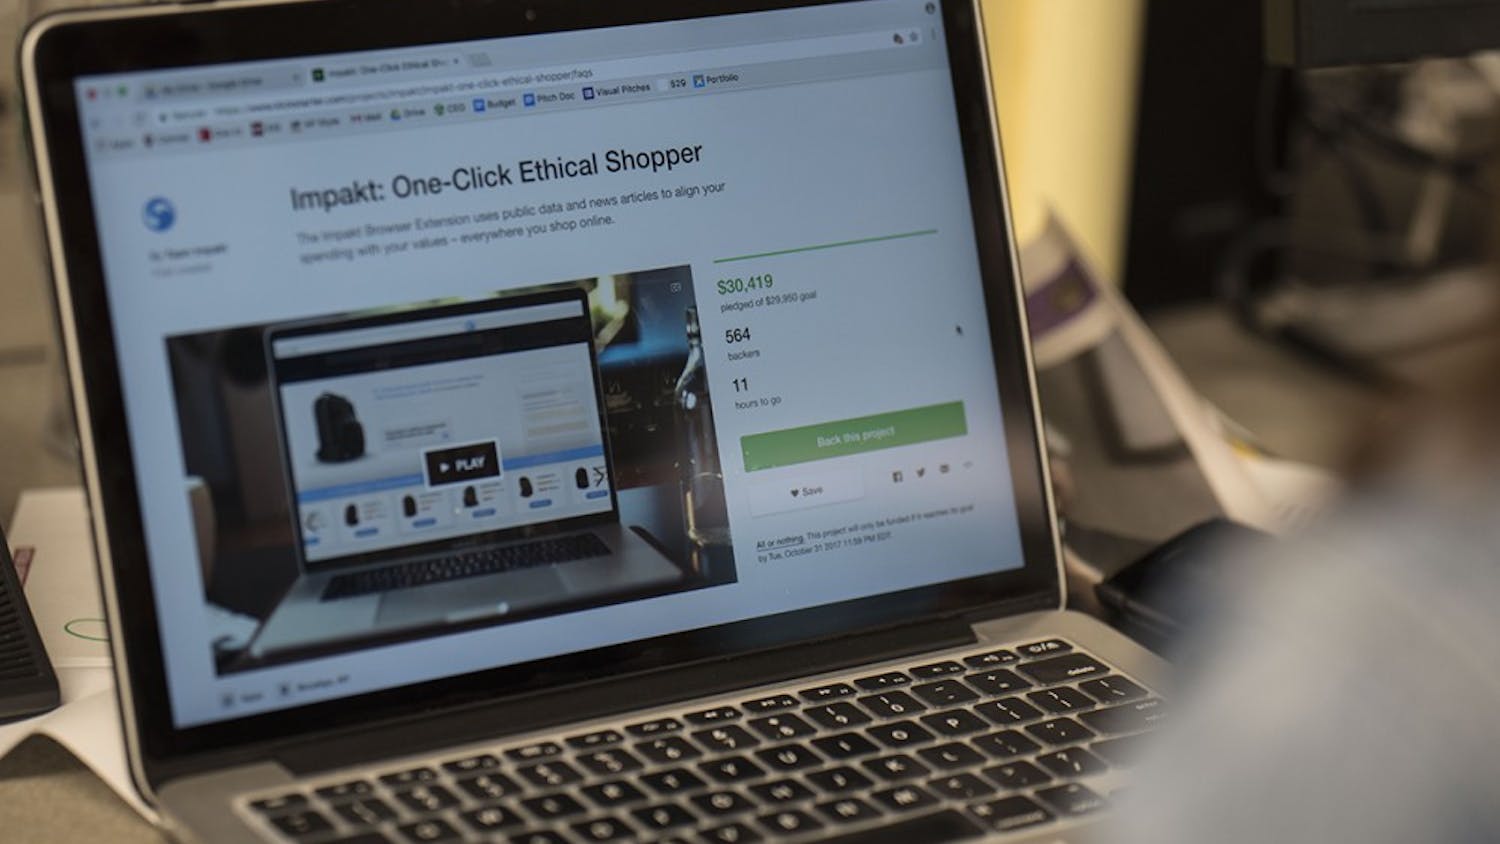 Impakt is a customizable browser extension created by IU alumnus Jonathan Hecht. The extension helps people find shopping options that match their values.&nbsp;